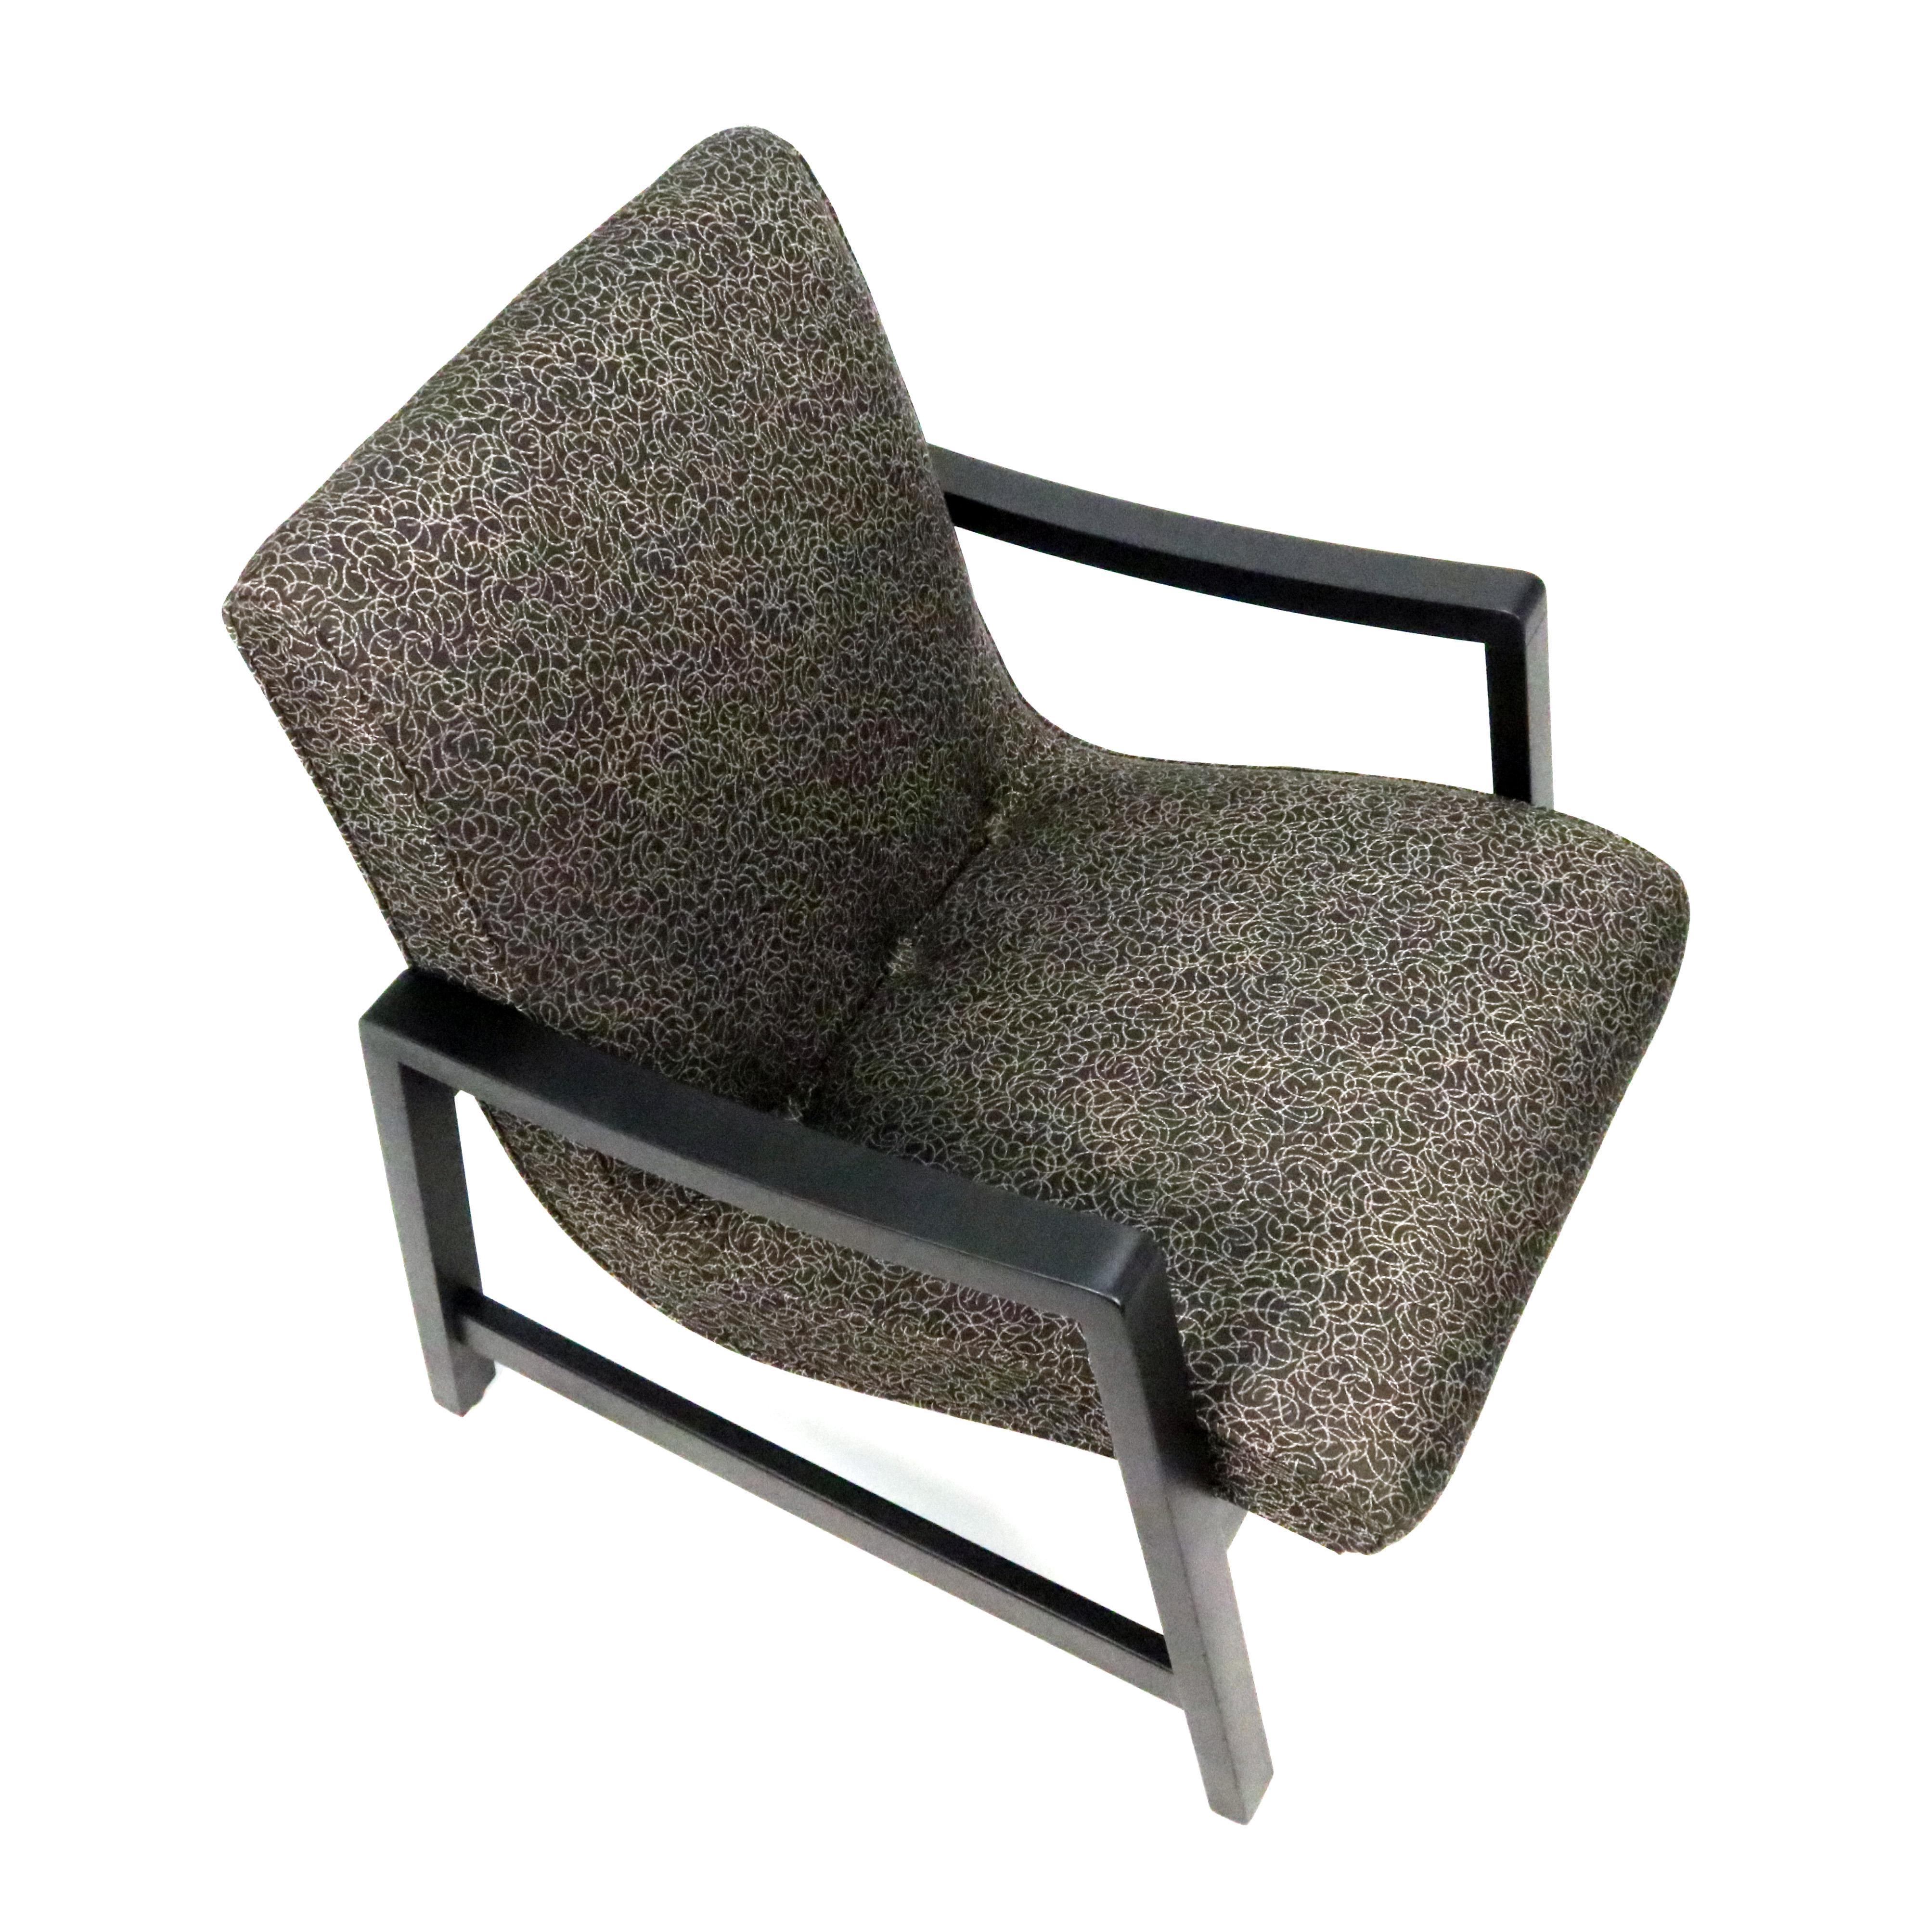 Early Jens Risom Lounge Chair for Knoll Associates 1